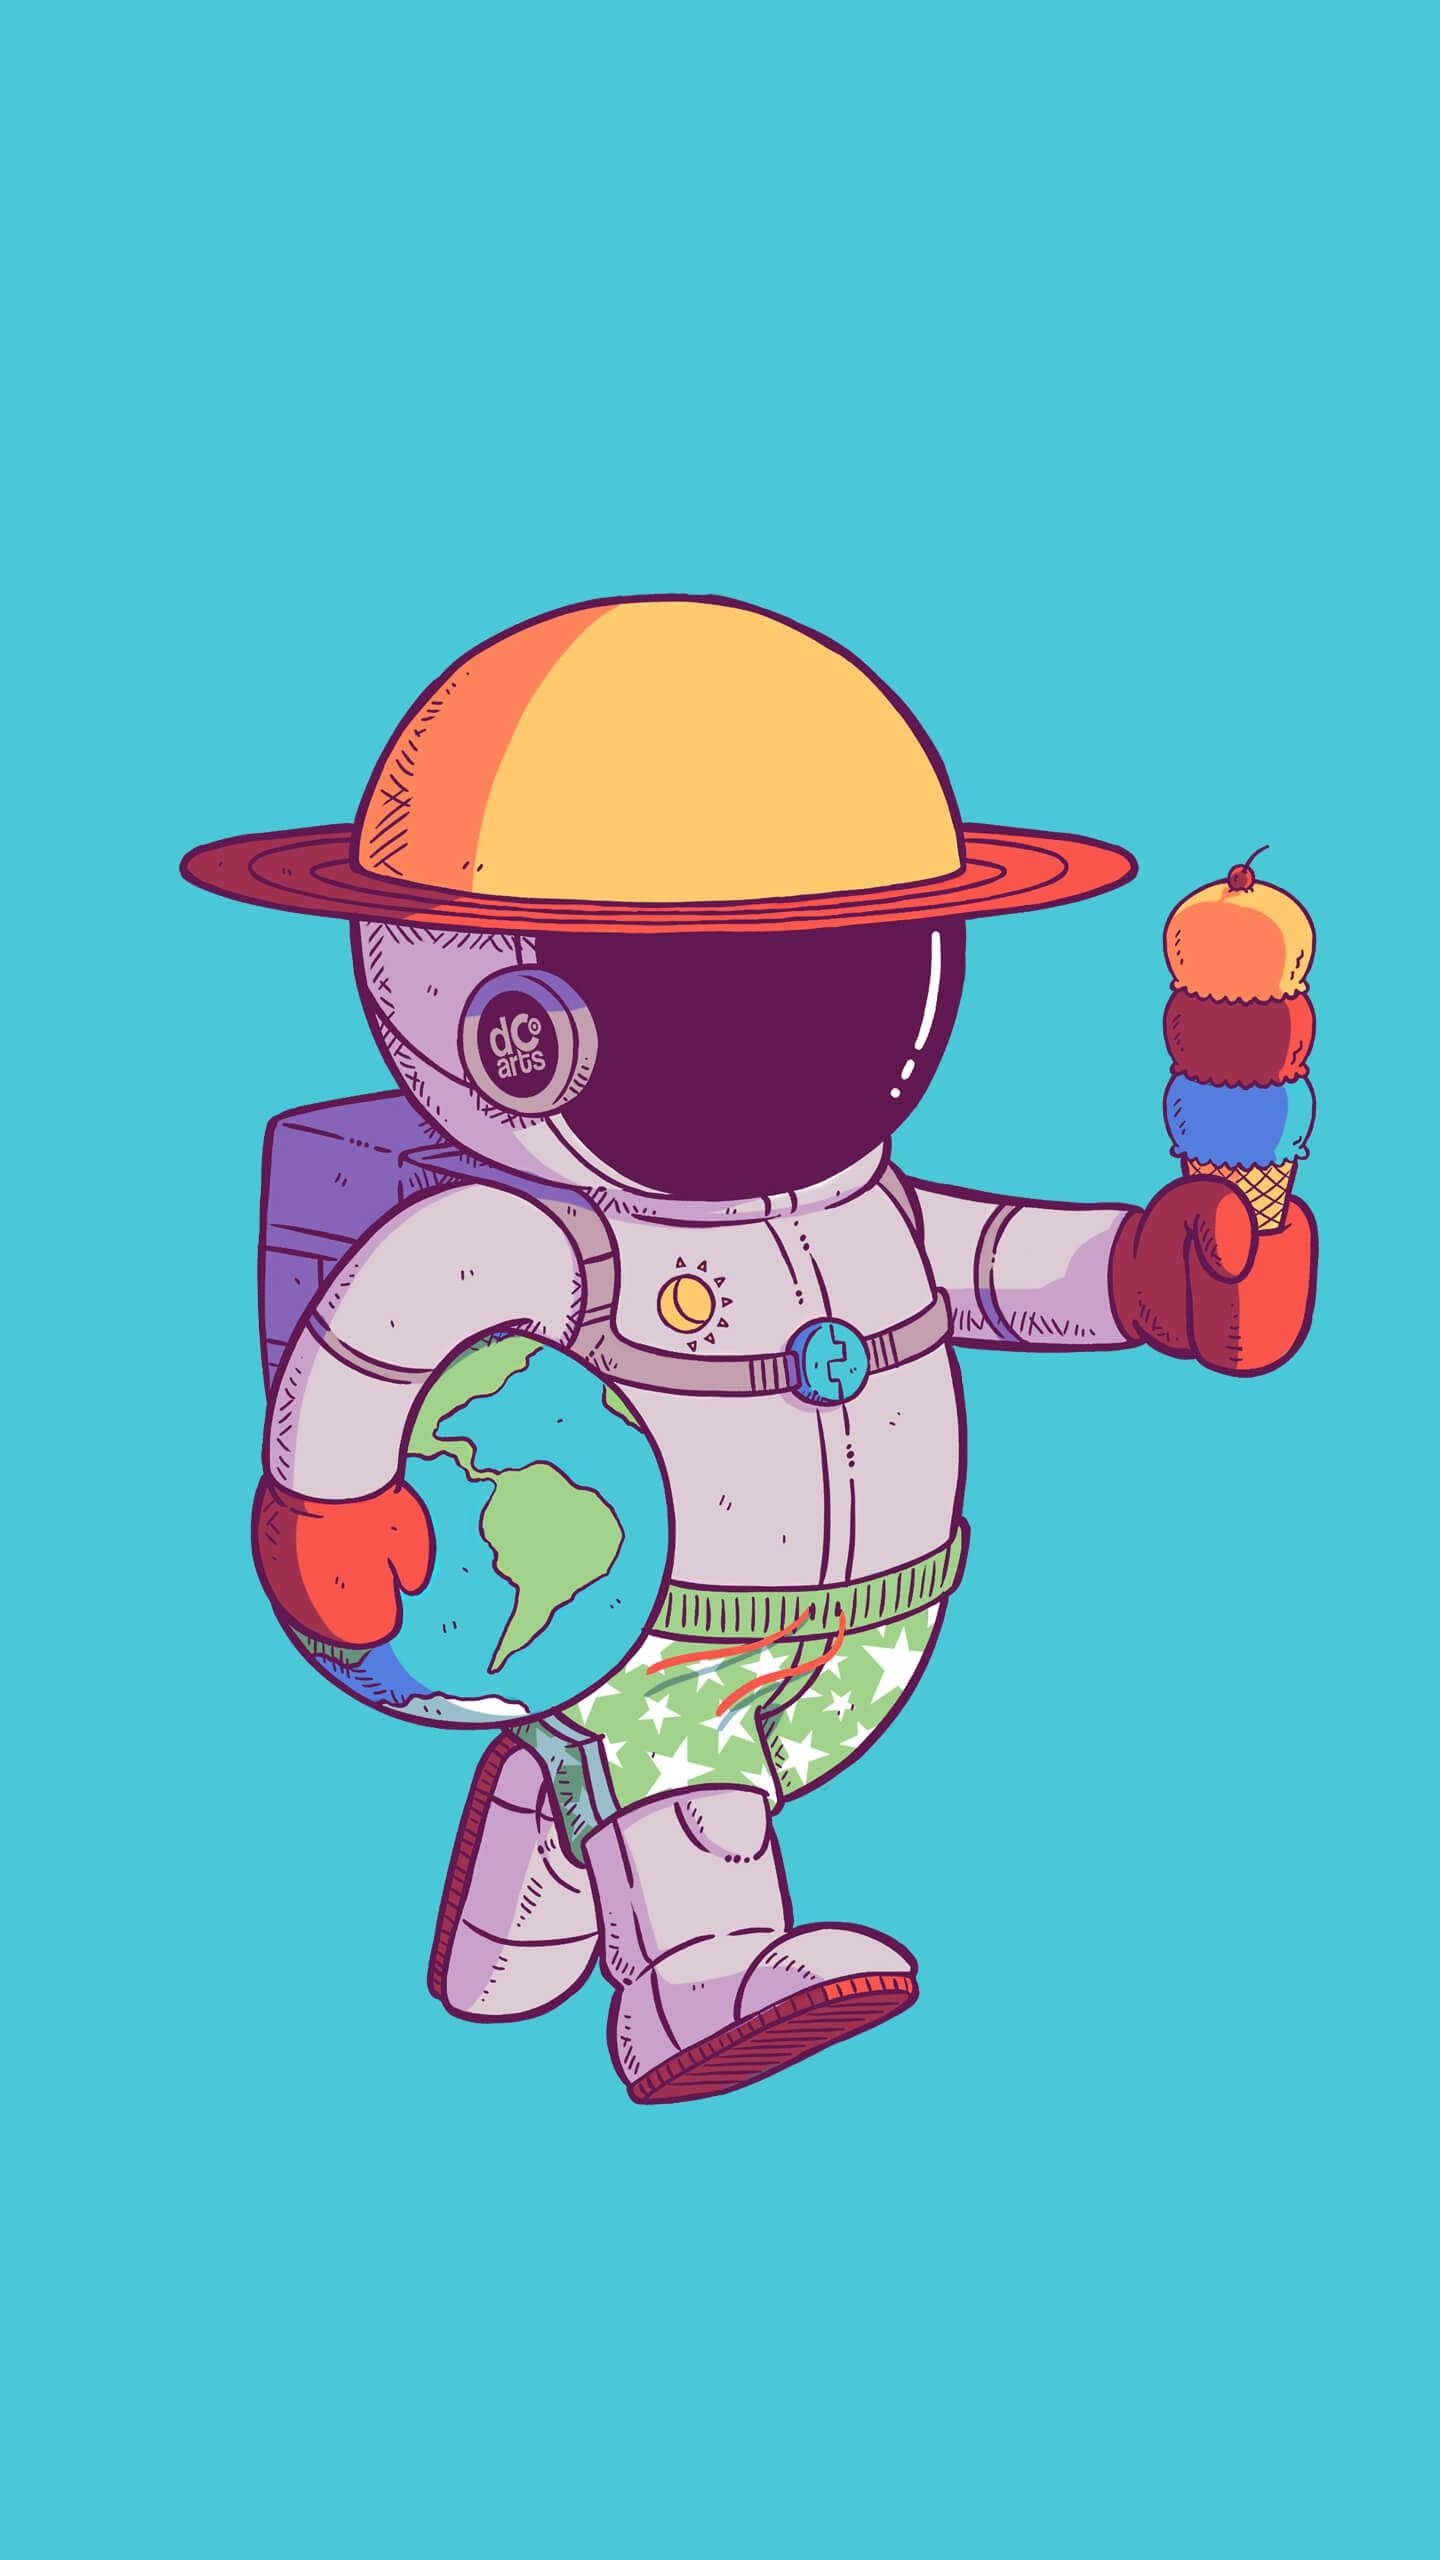 Astronaut with ice cream cone and planet Earth as a ball. - Astronaut